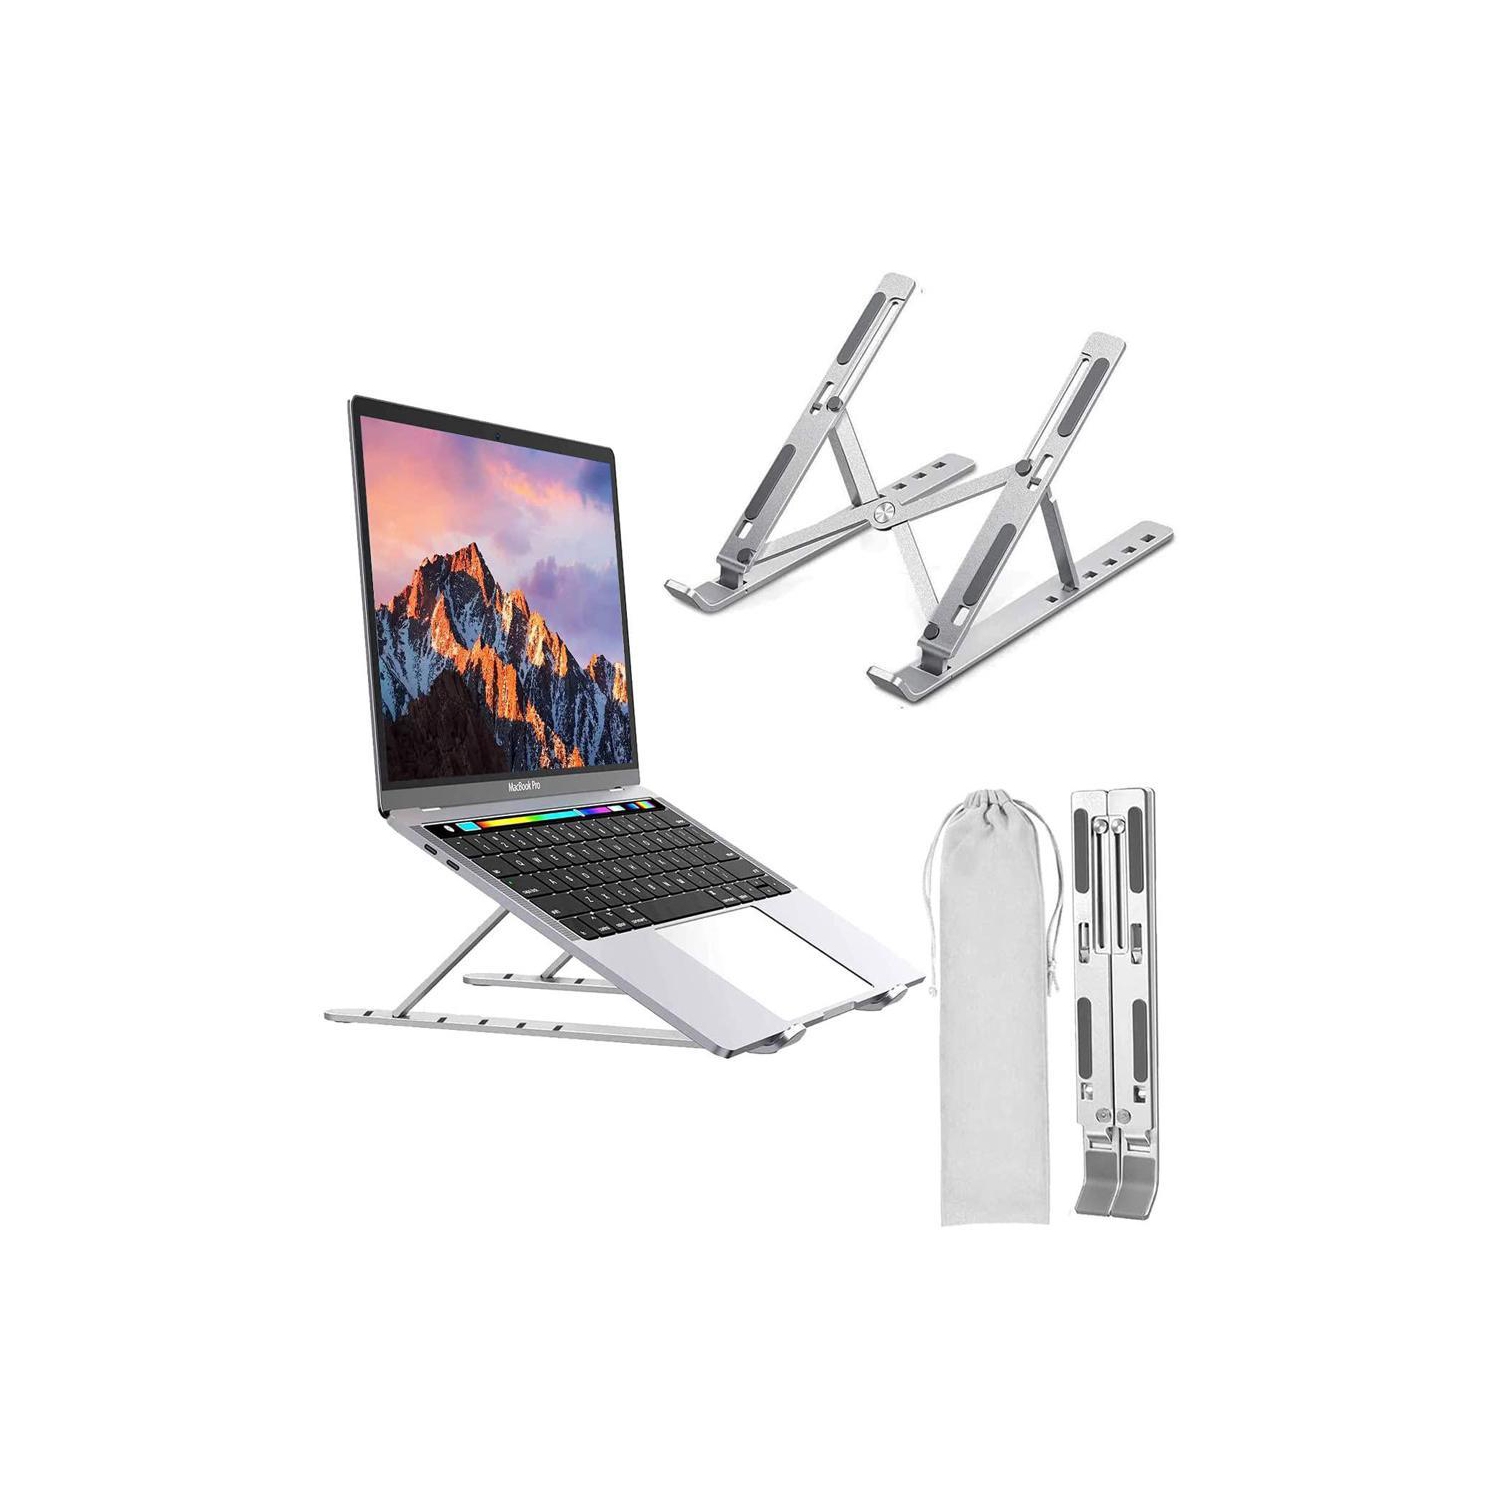 Laptop Stand, Universal Adjustable Aluminum Stand for 10-16 inch Laptops, Tablets and E-Book Readers